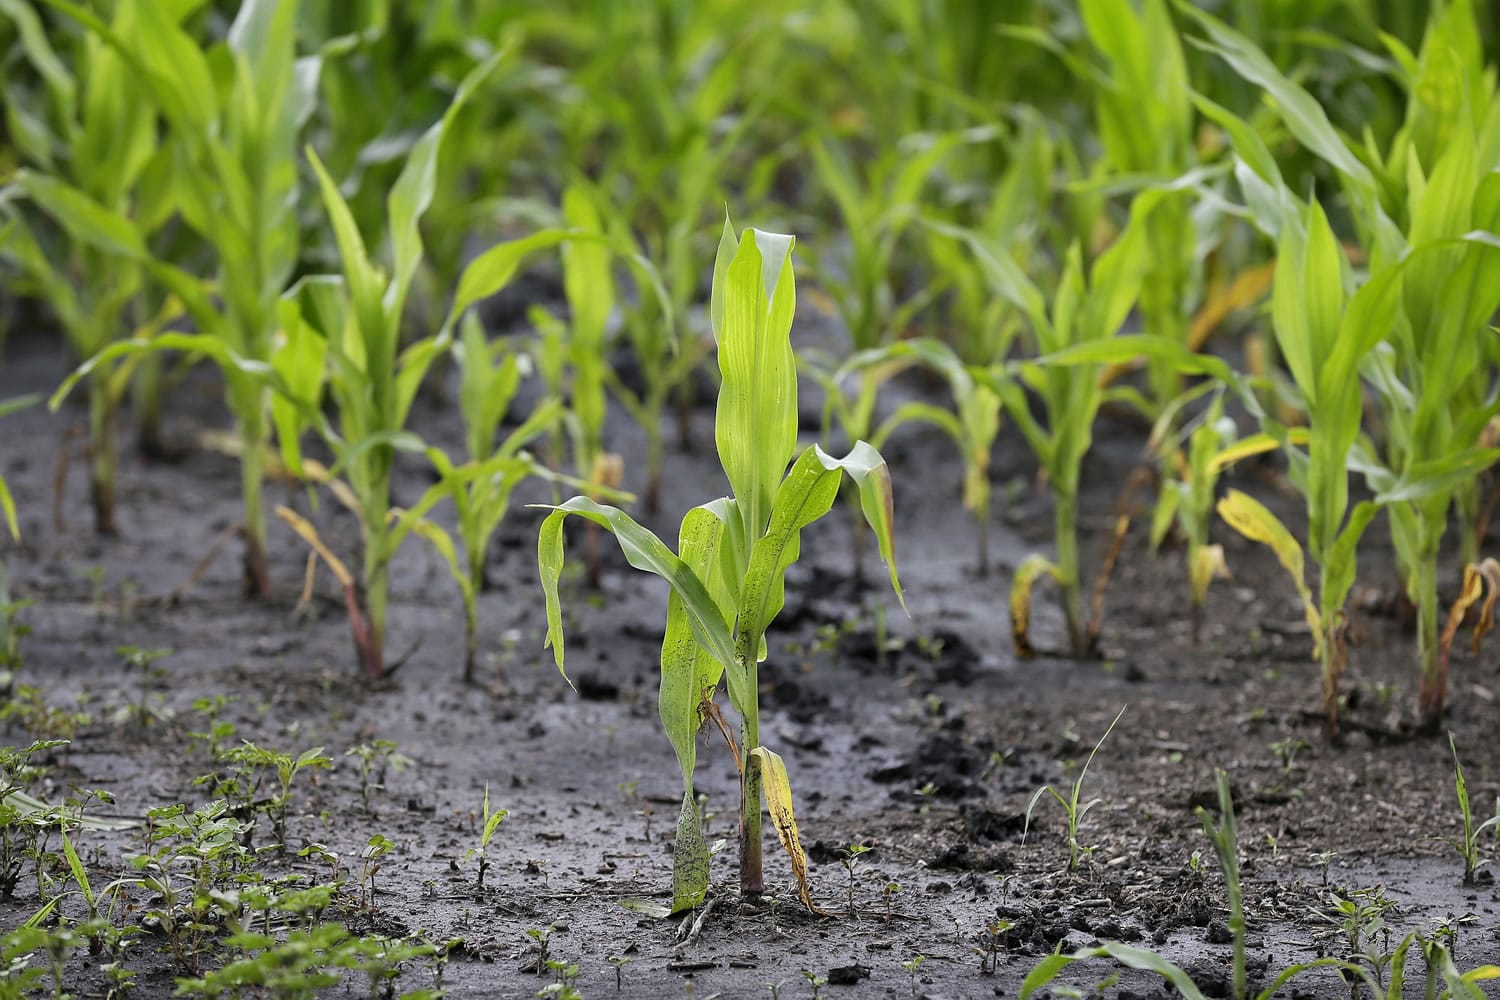 A corn plant sits in a muddy farm field, Monday, June 30, 2014, near Dallas Center, Iowa. The U.S. Department of Agriculture, in a report released Monday, says farmers are planting the smallest corn crop since 2010 but as expected have planted the largest soybean crop on record.